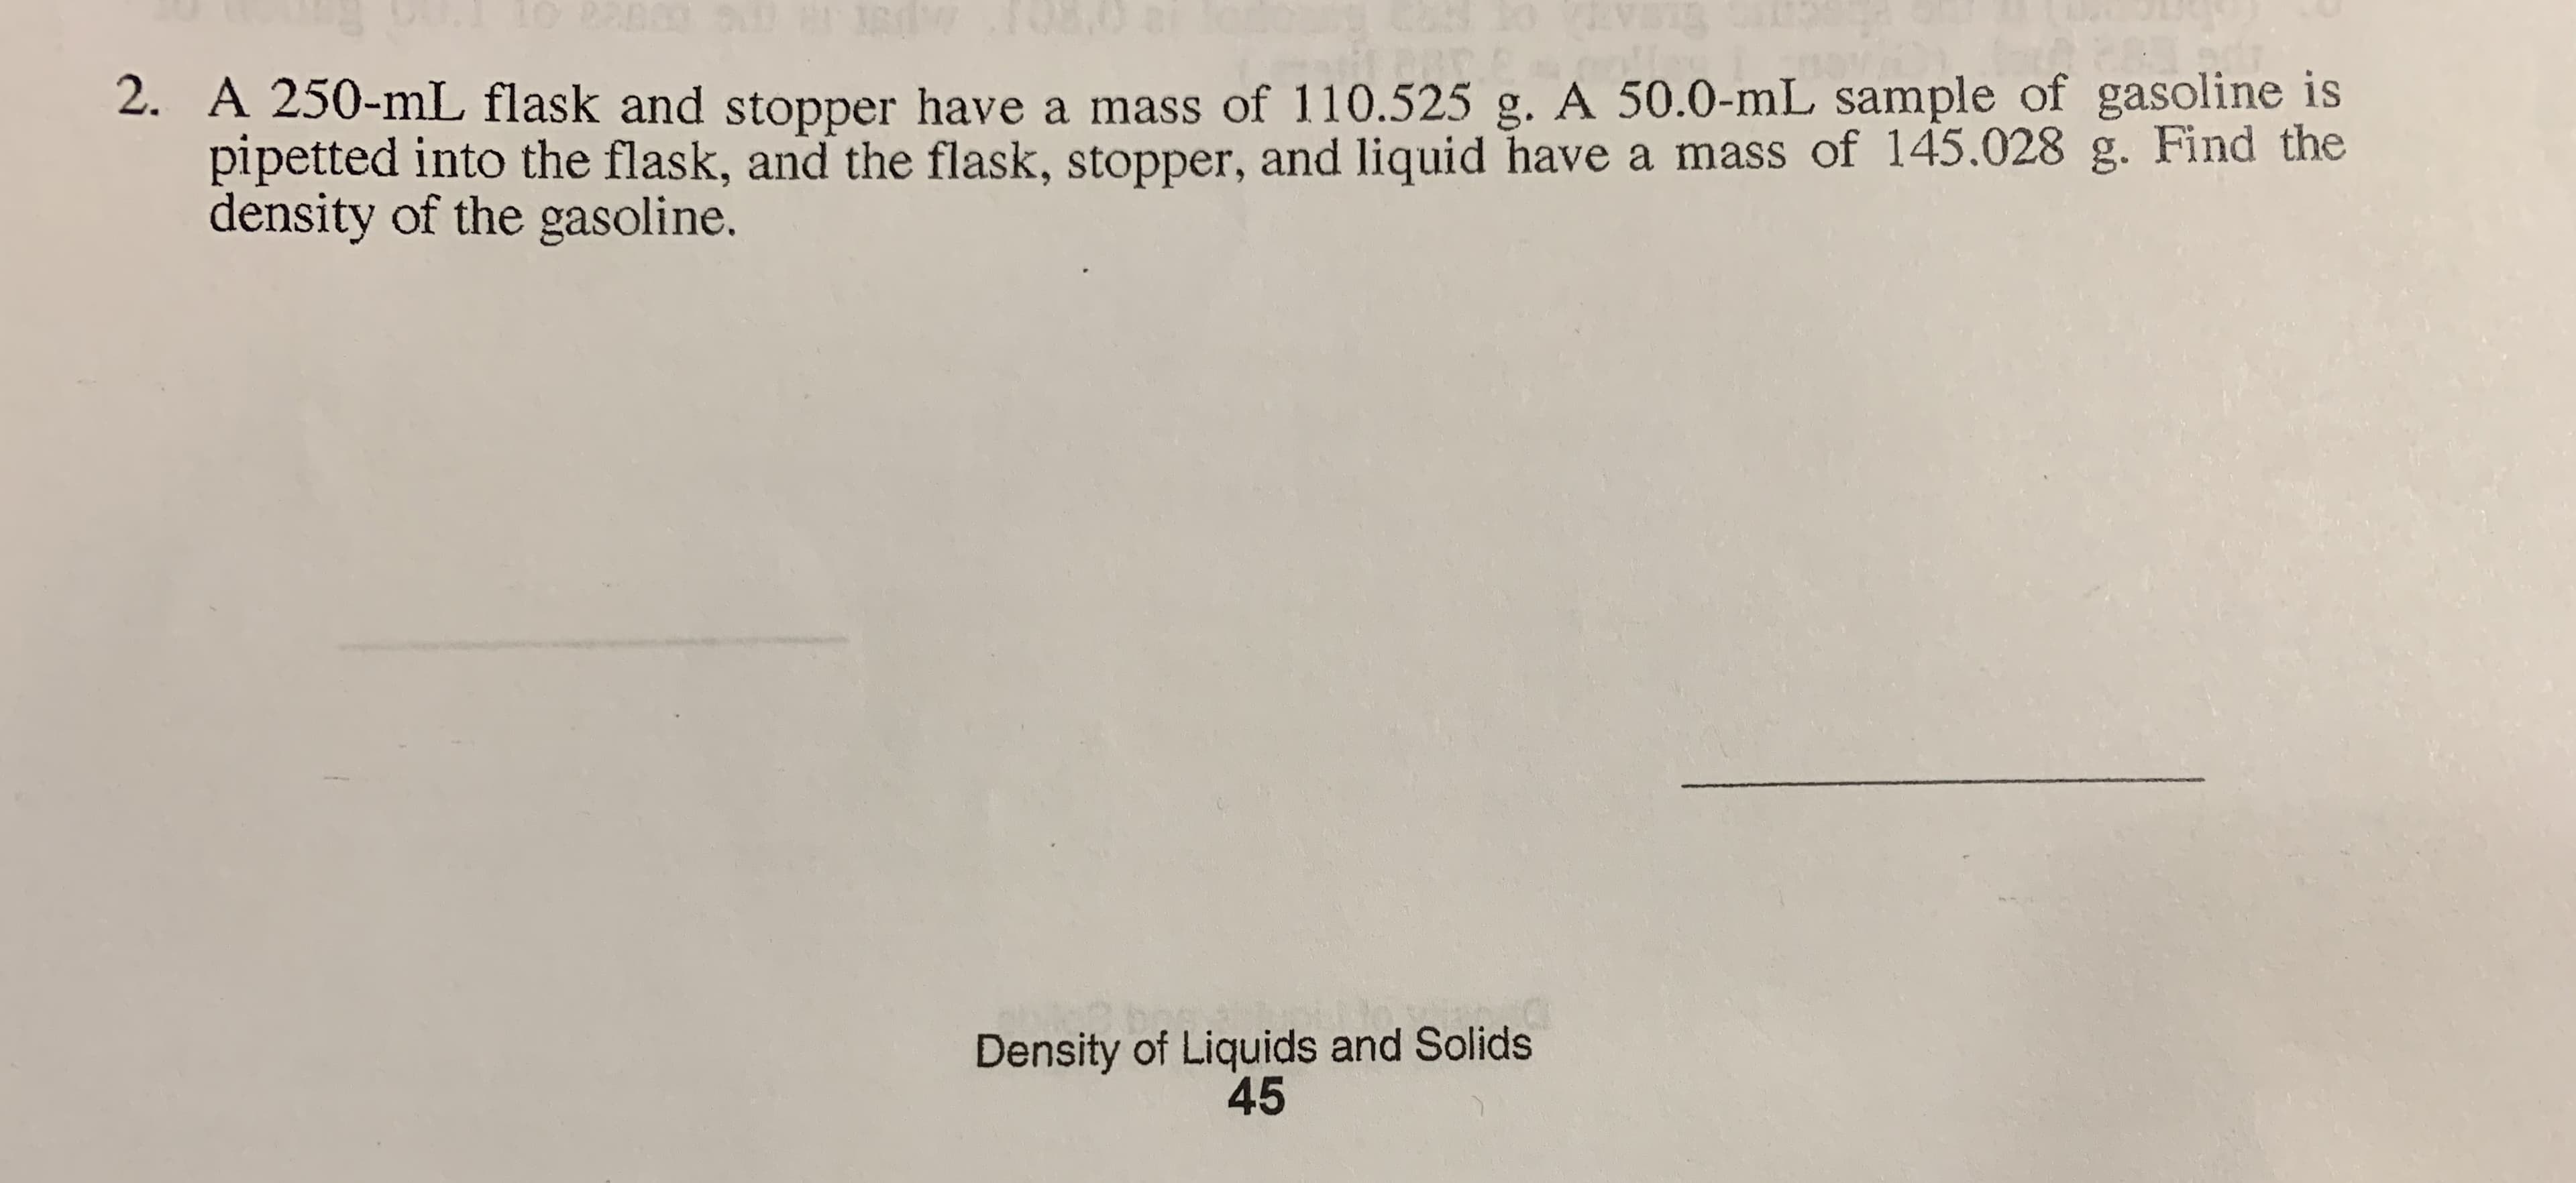 2. A 250-mL flask and stopper have a mass of 110.525 g. A 50.0-mL sample of gasoline is
pipetted into the flask, and the flask, stopper, and liquid have a mass of 145.028 g. Find the
density of the gasoline.
Density of Liquids and Solids
45
